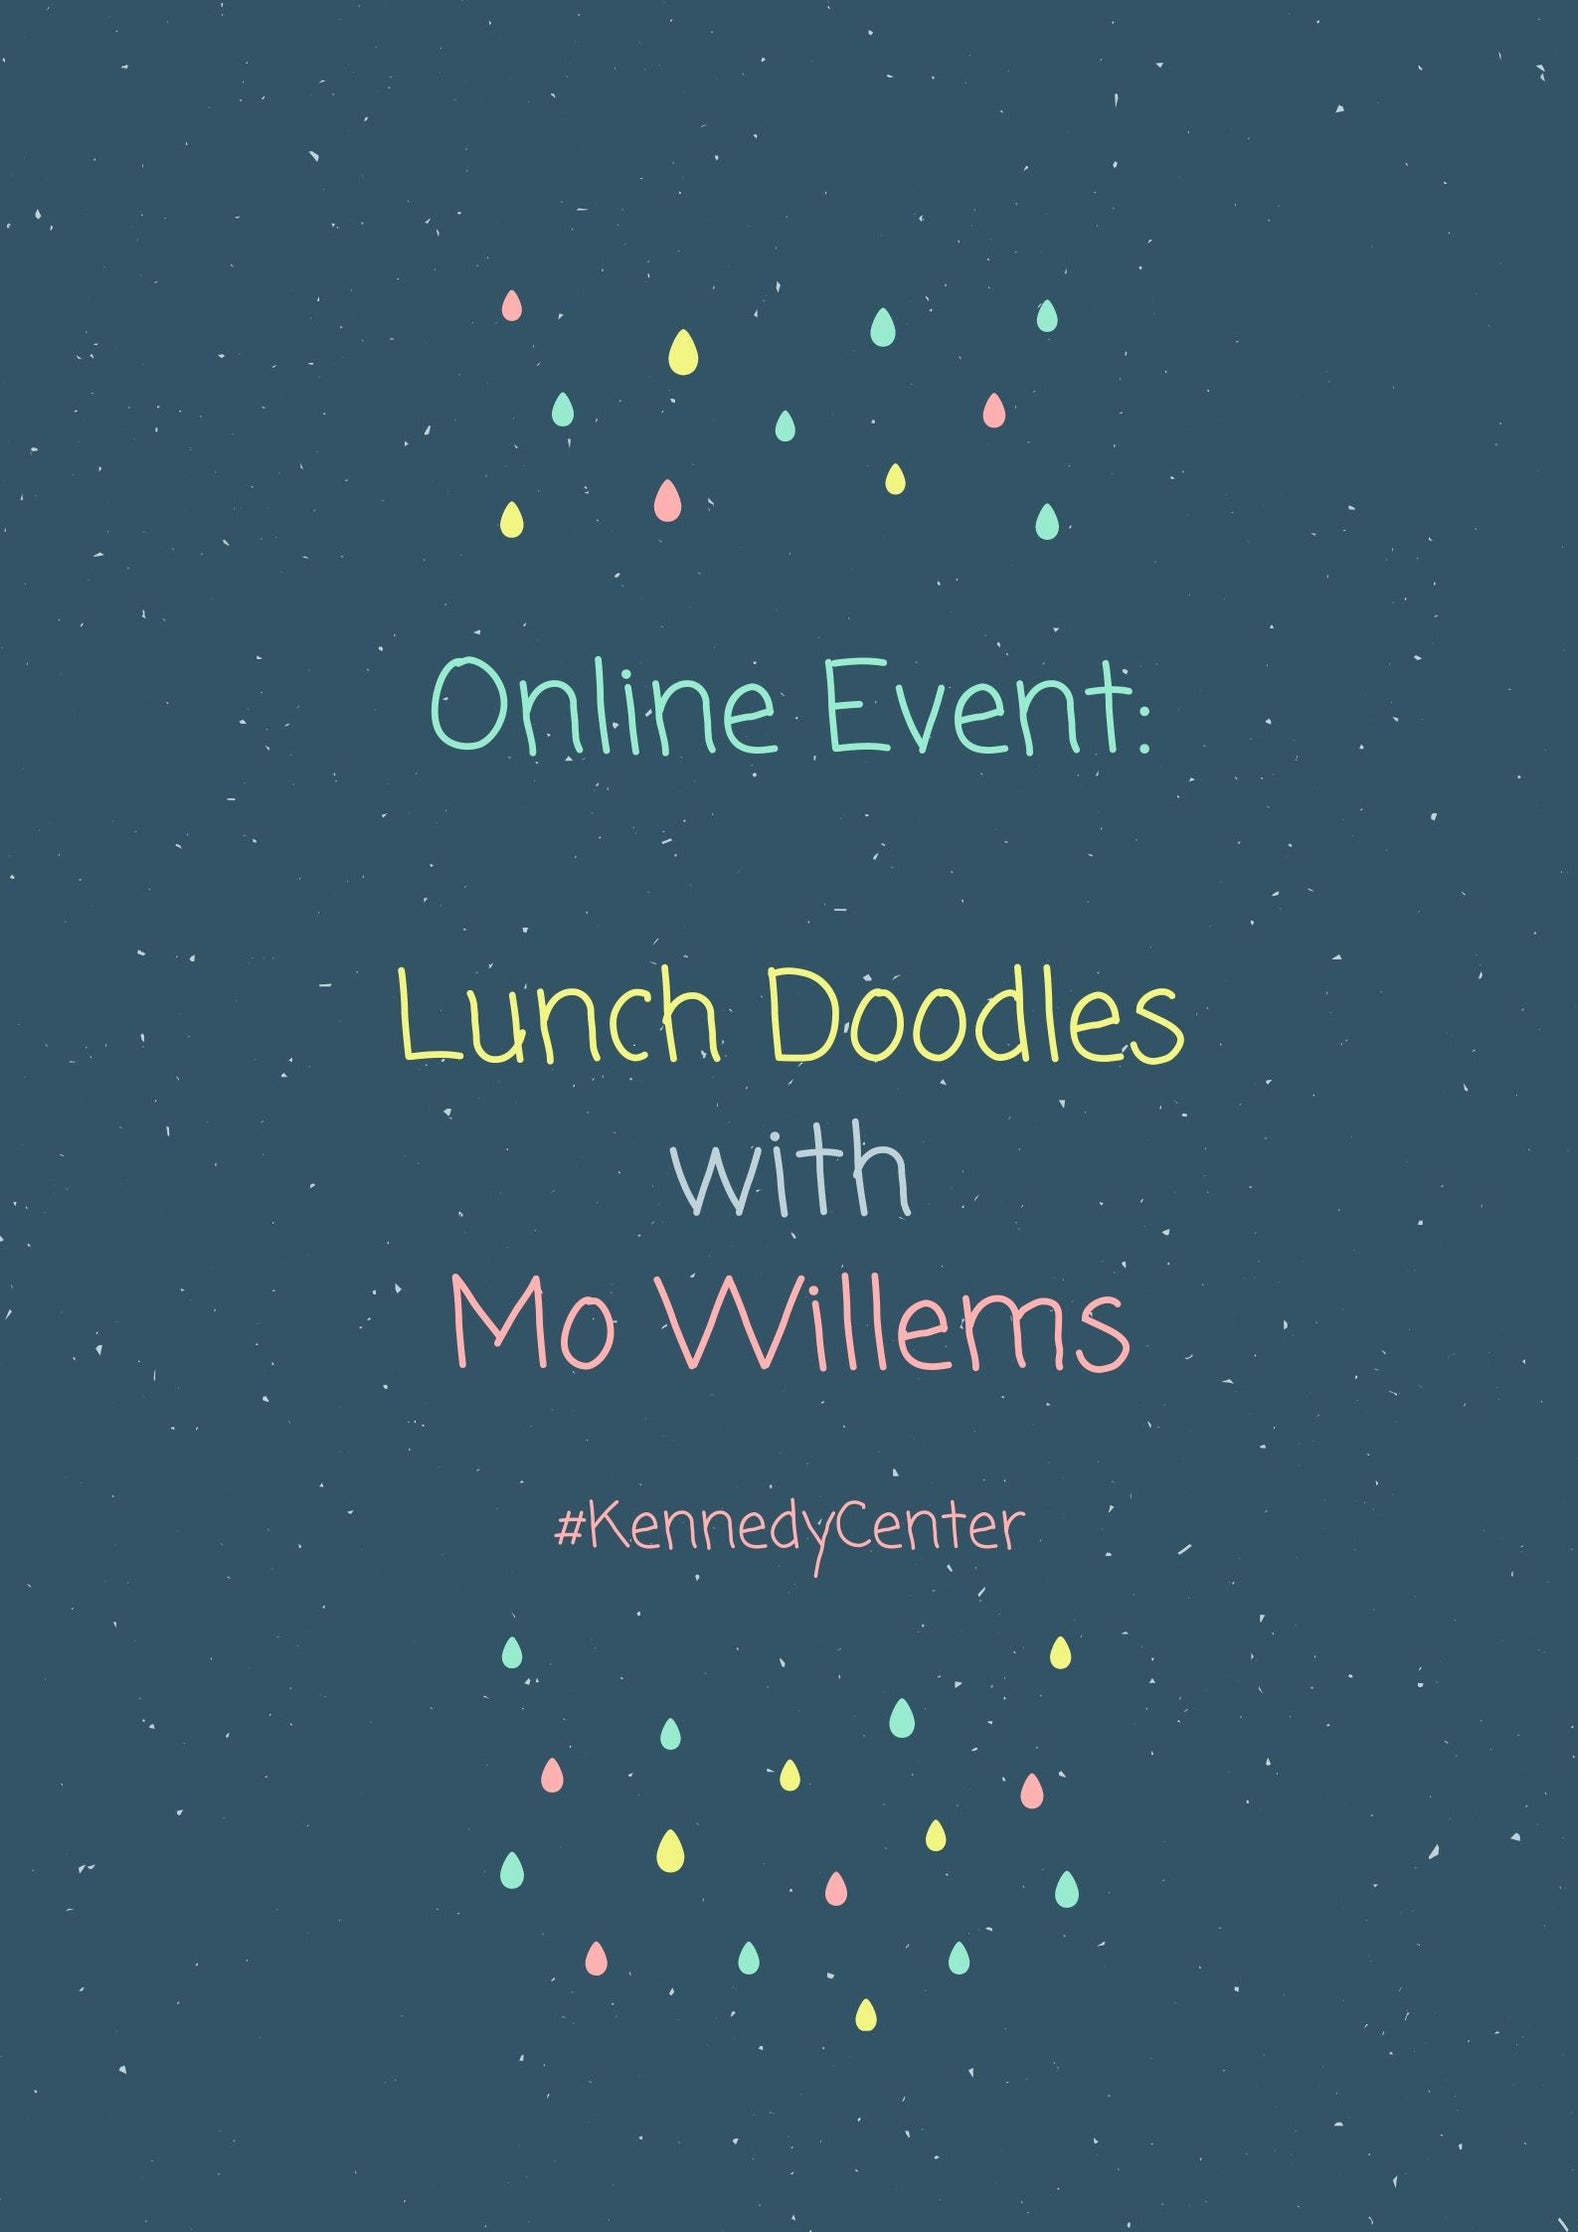 Online Event Lunch Doodles With Mo Willems Kennedycenter Ladderworks